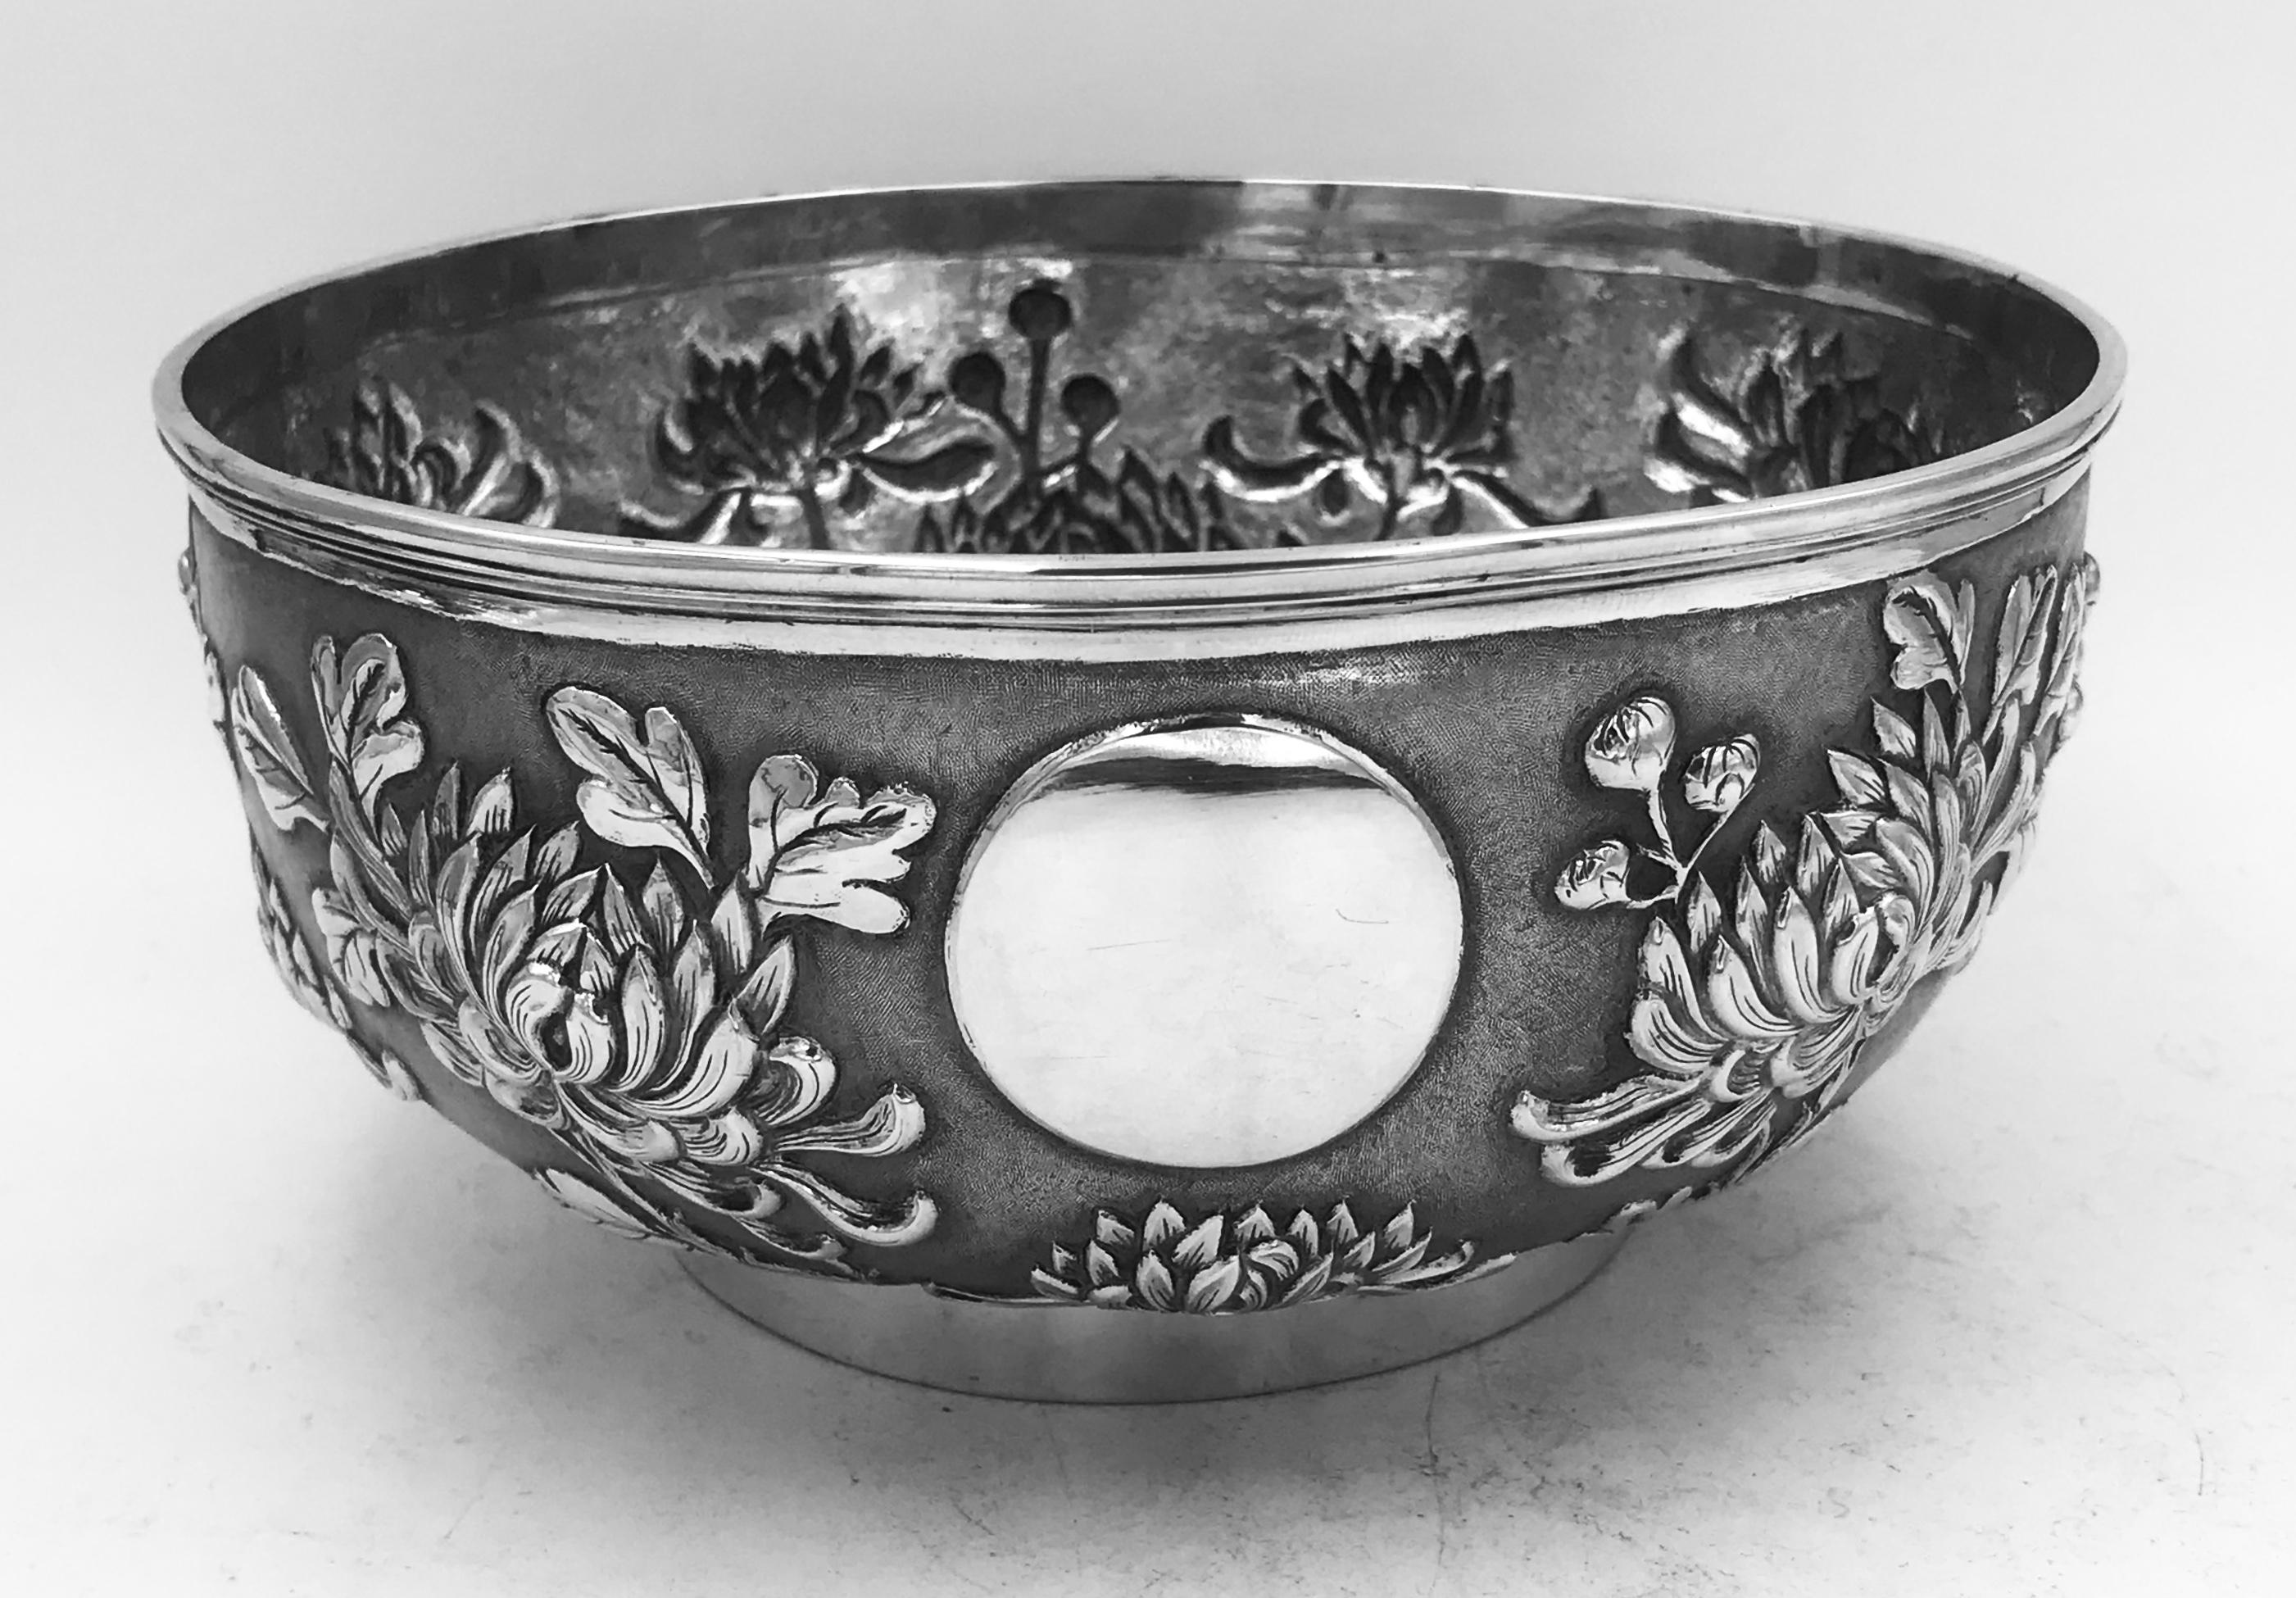 A Chinese Export silver bowl decorated with chrysanthemum against a matte background.
Made by the firm of Lian xiang sheng of Shanghai and Canton, and retailed by Hung Chong.